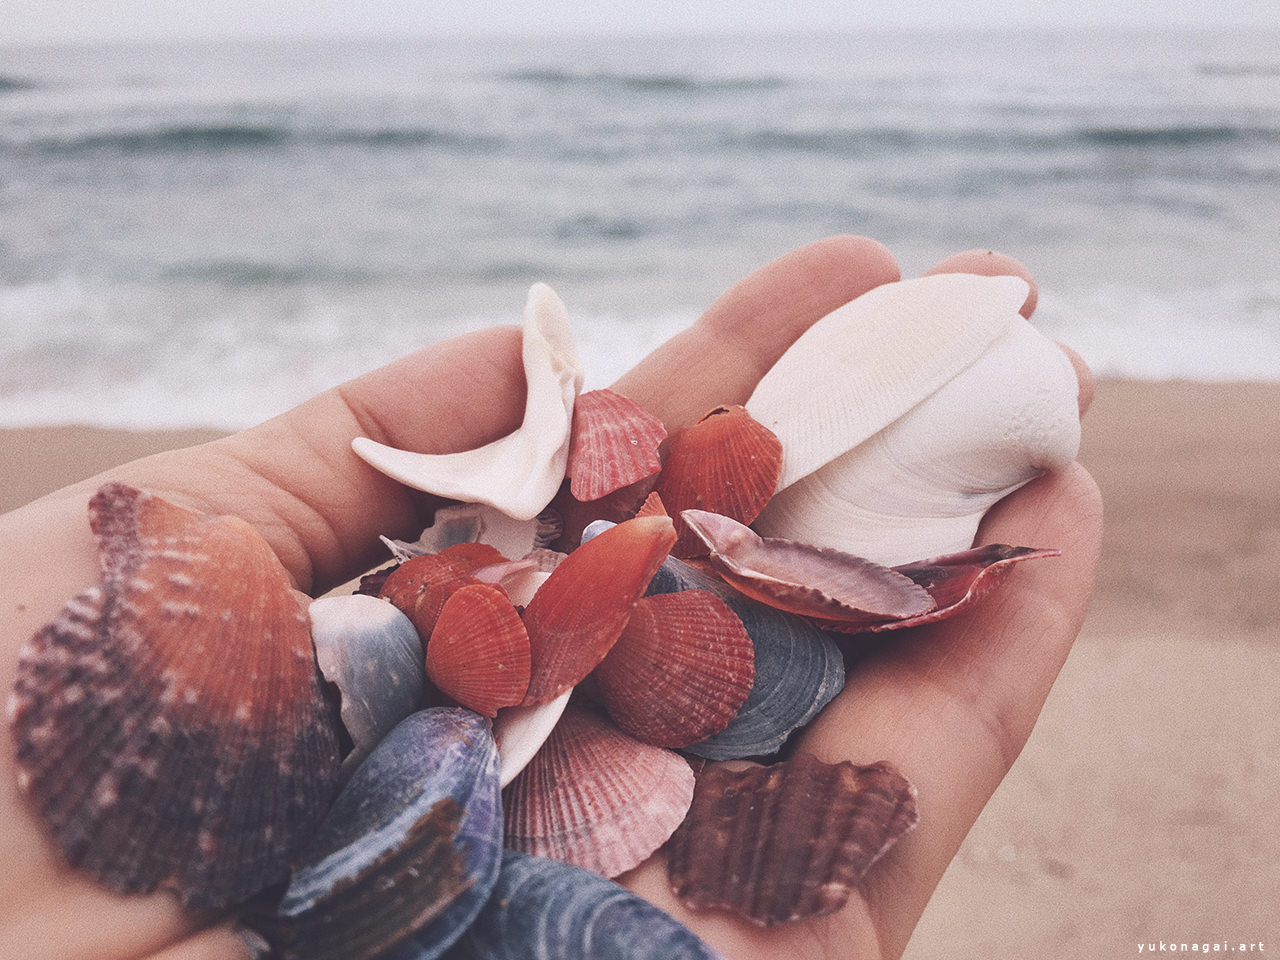 Sea shells in a cupped hand.